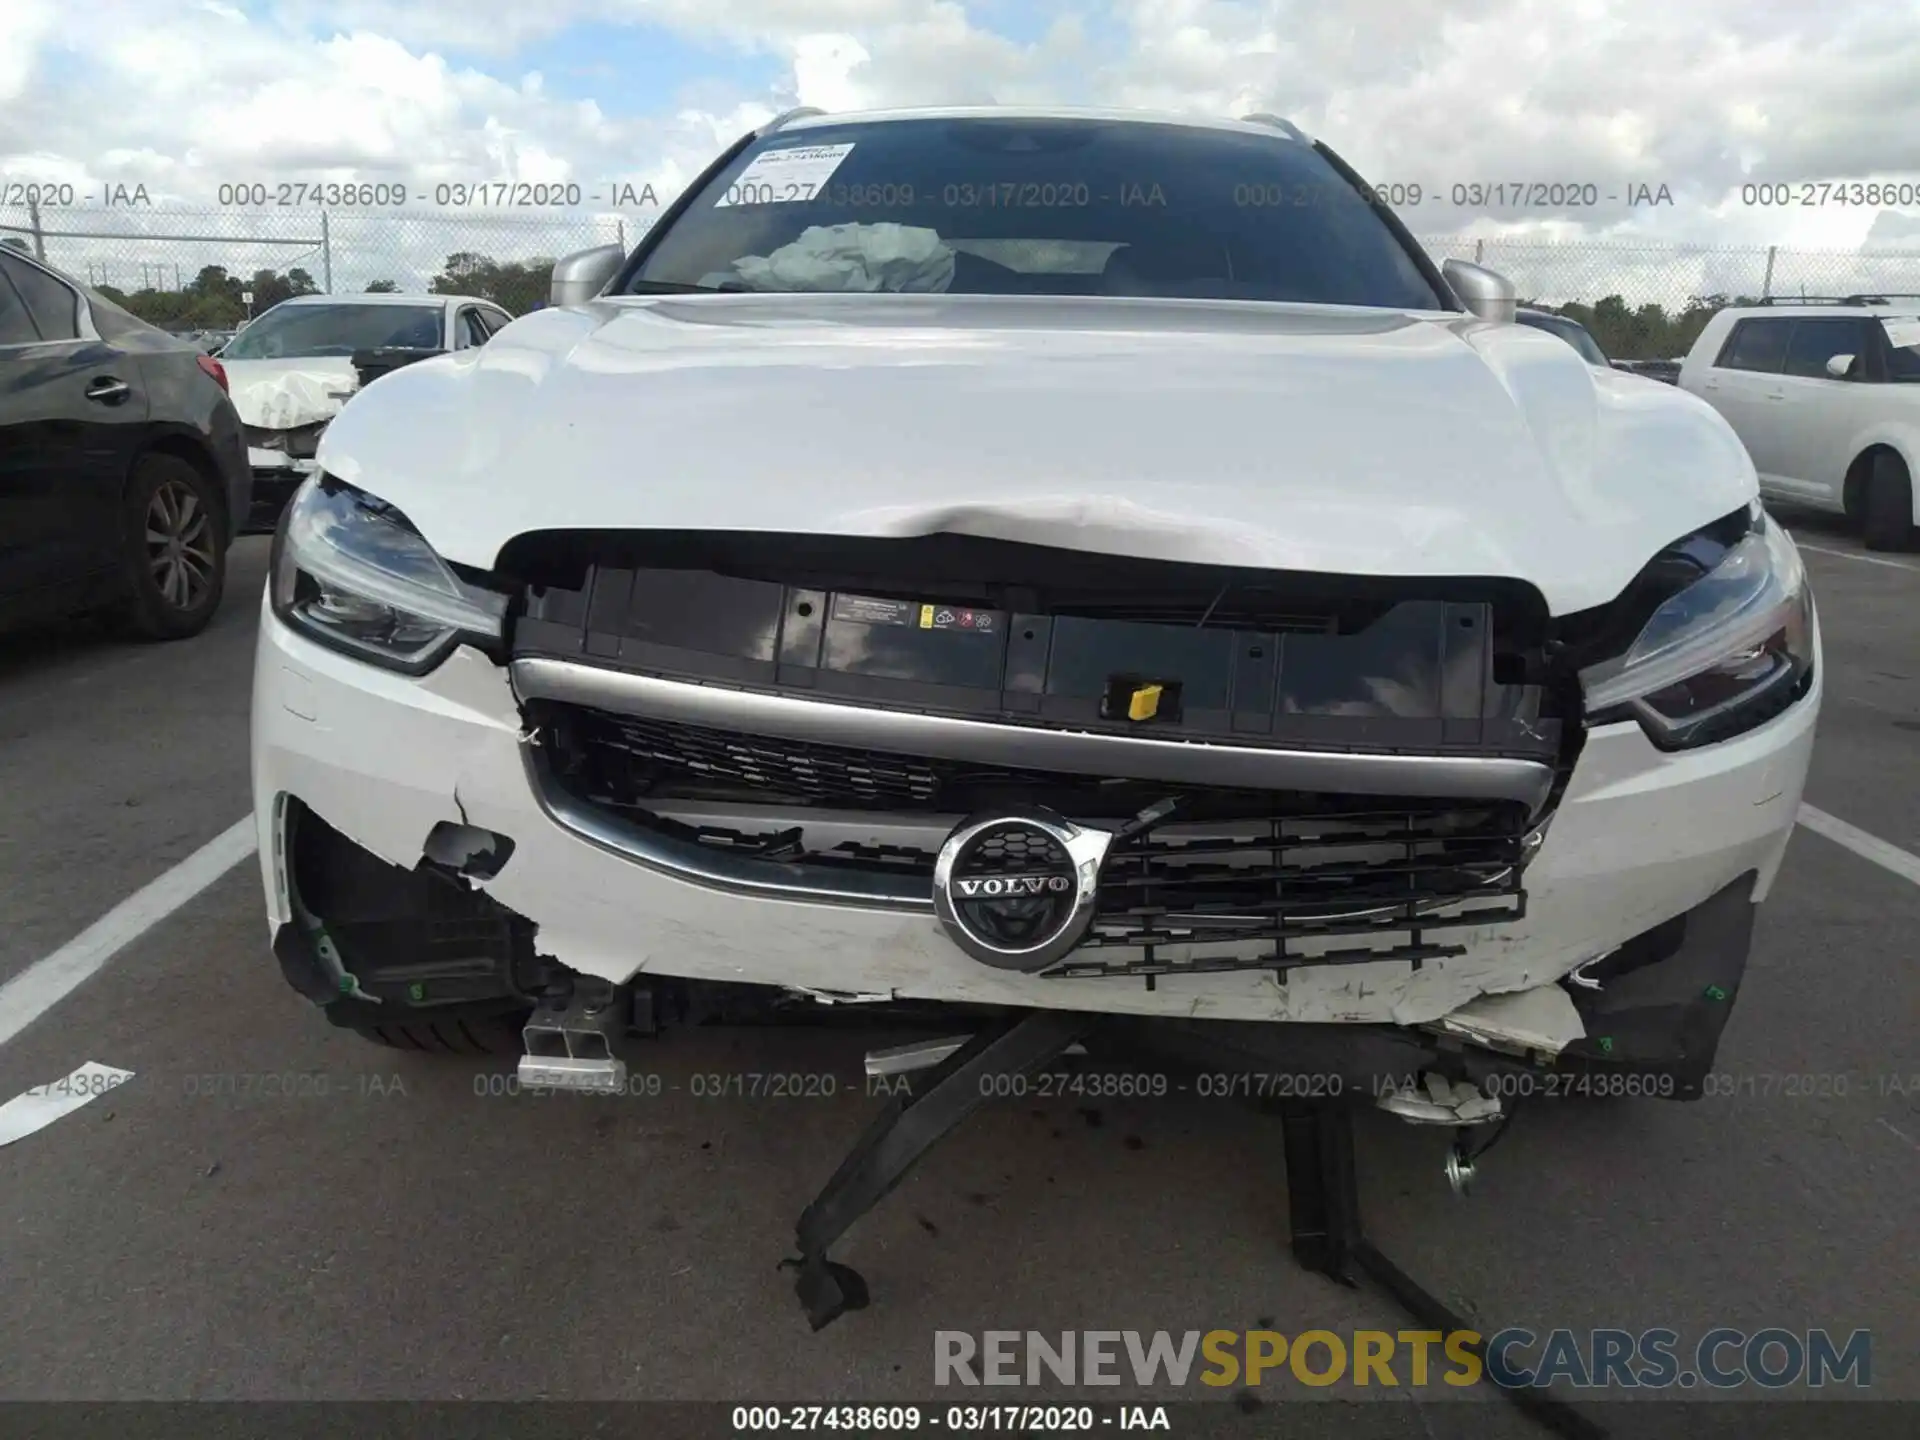 6 Photograph of a damaged car YV4A22RM1K1378967 VOLVO XC60 2019